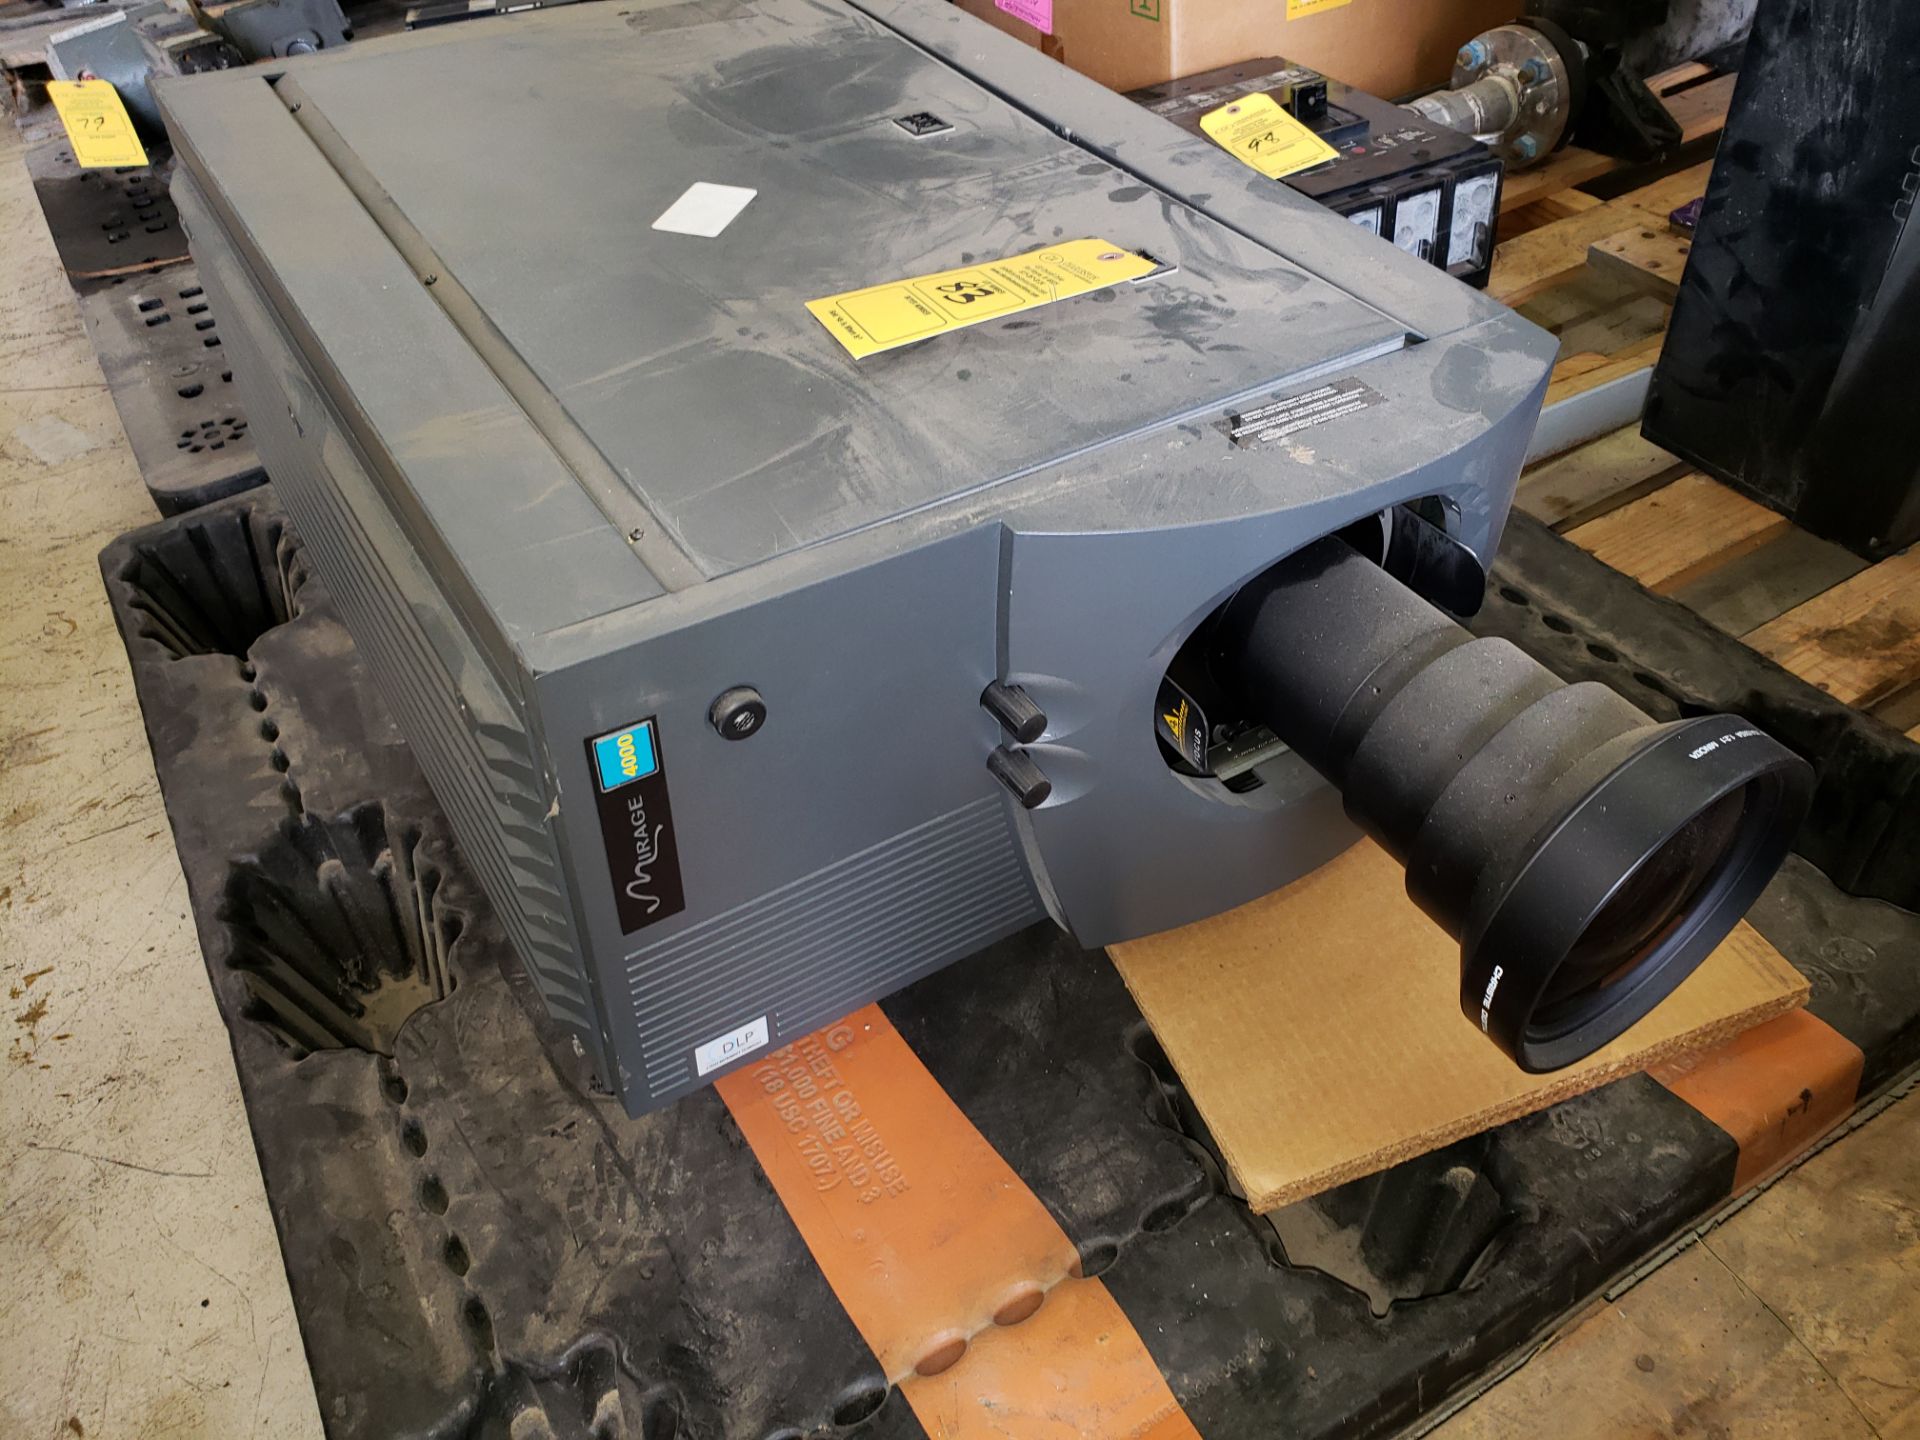 CHRISTIE DIGITAL SYSTEMS PROJECTOR MODEL-38-DMD023-09 S#385520001 (LOCATED AT 432 COUNCIL DRIVE FORT